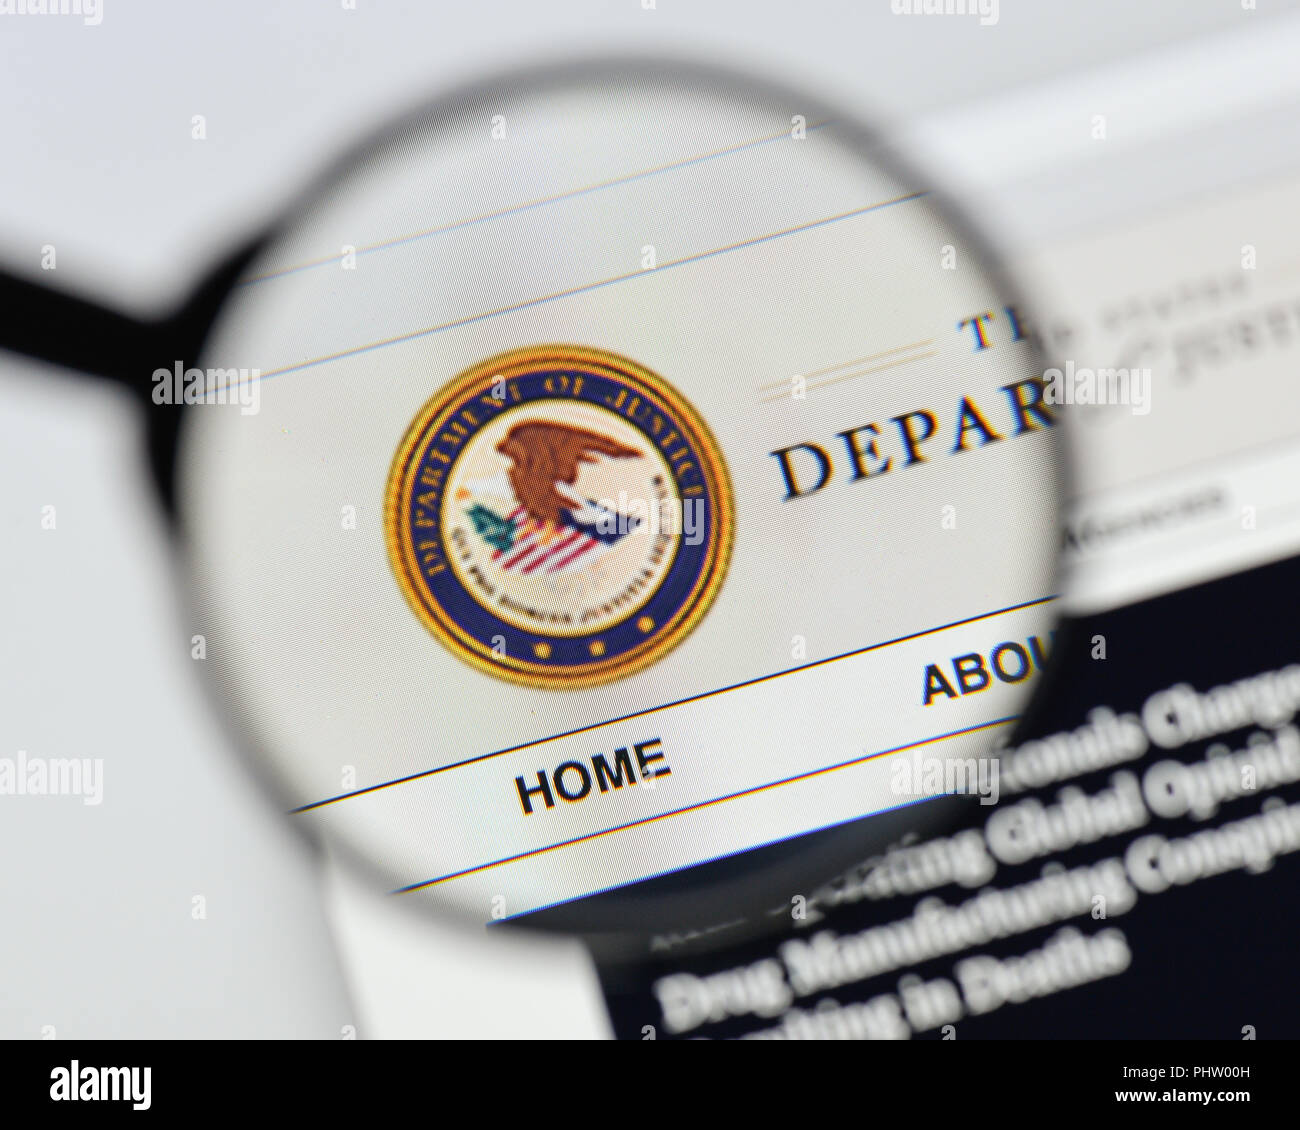 Milan, Italy - August 20, 2018: Justice Department website homepage. Justice Department logo visible. Stock Photo